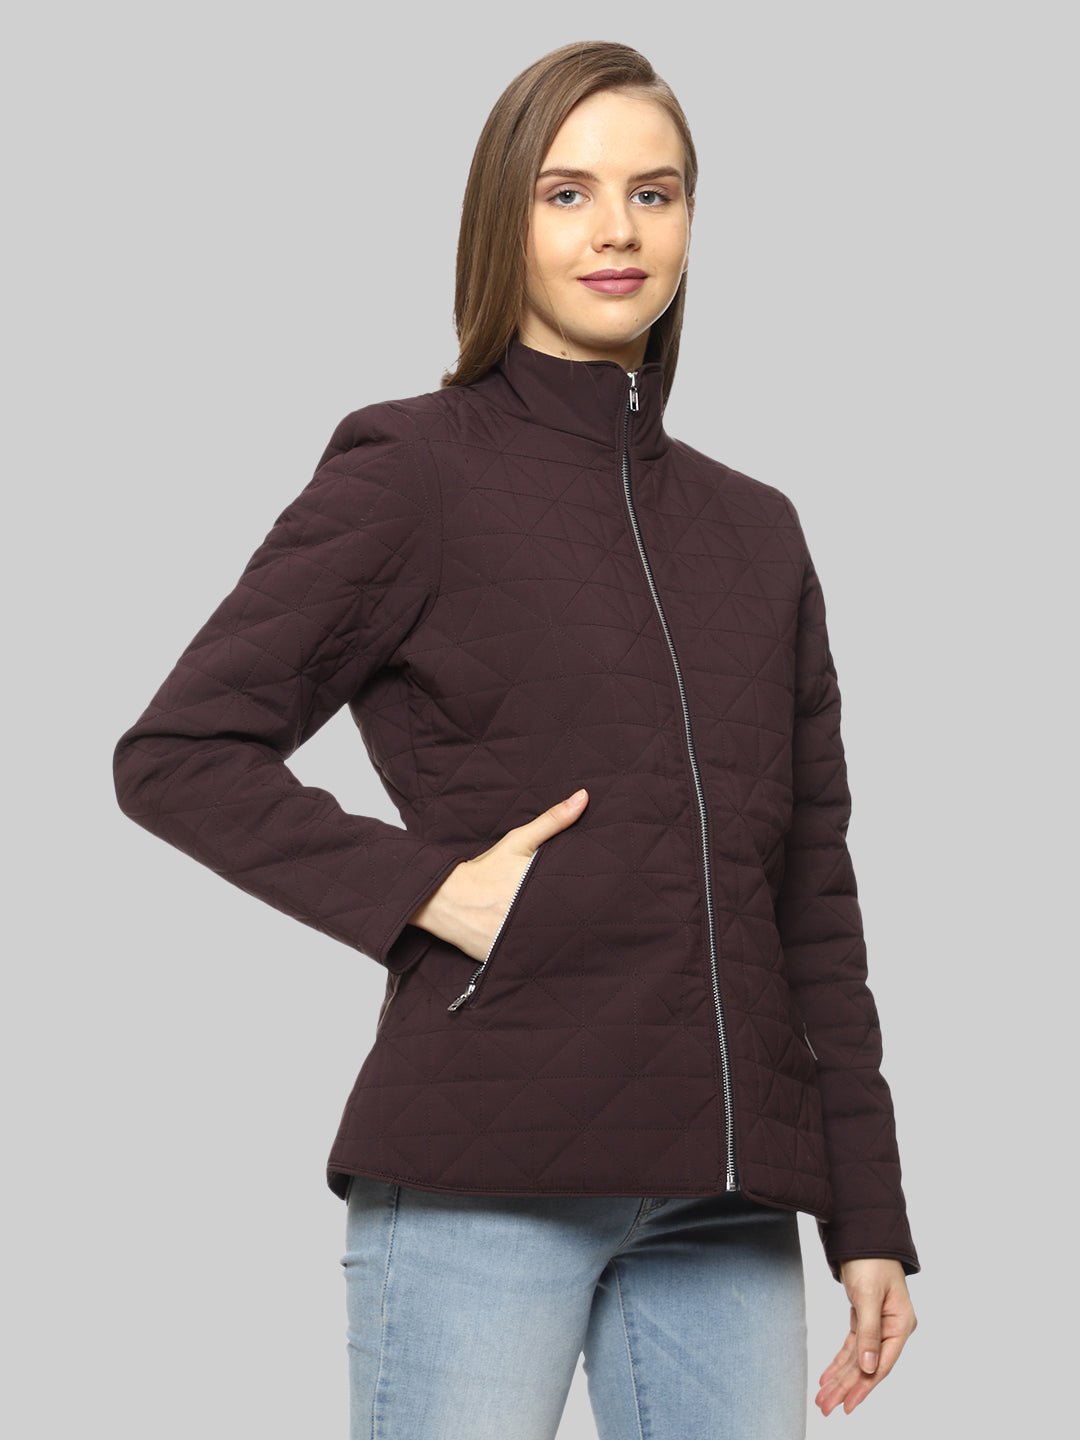 Quilted Jacket For Women